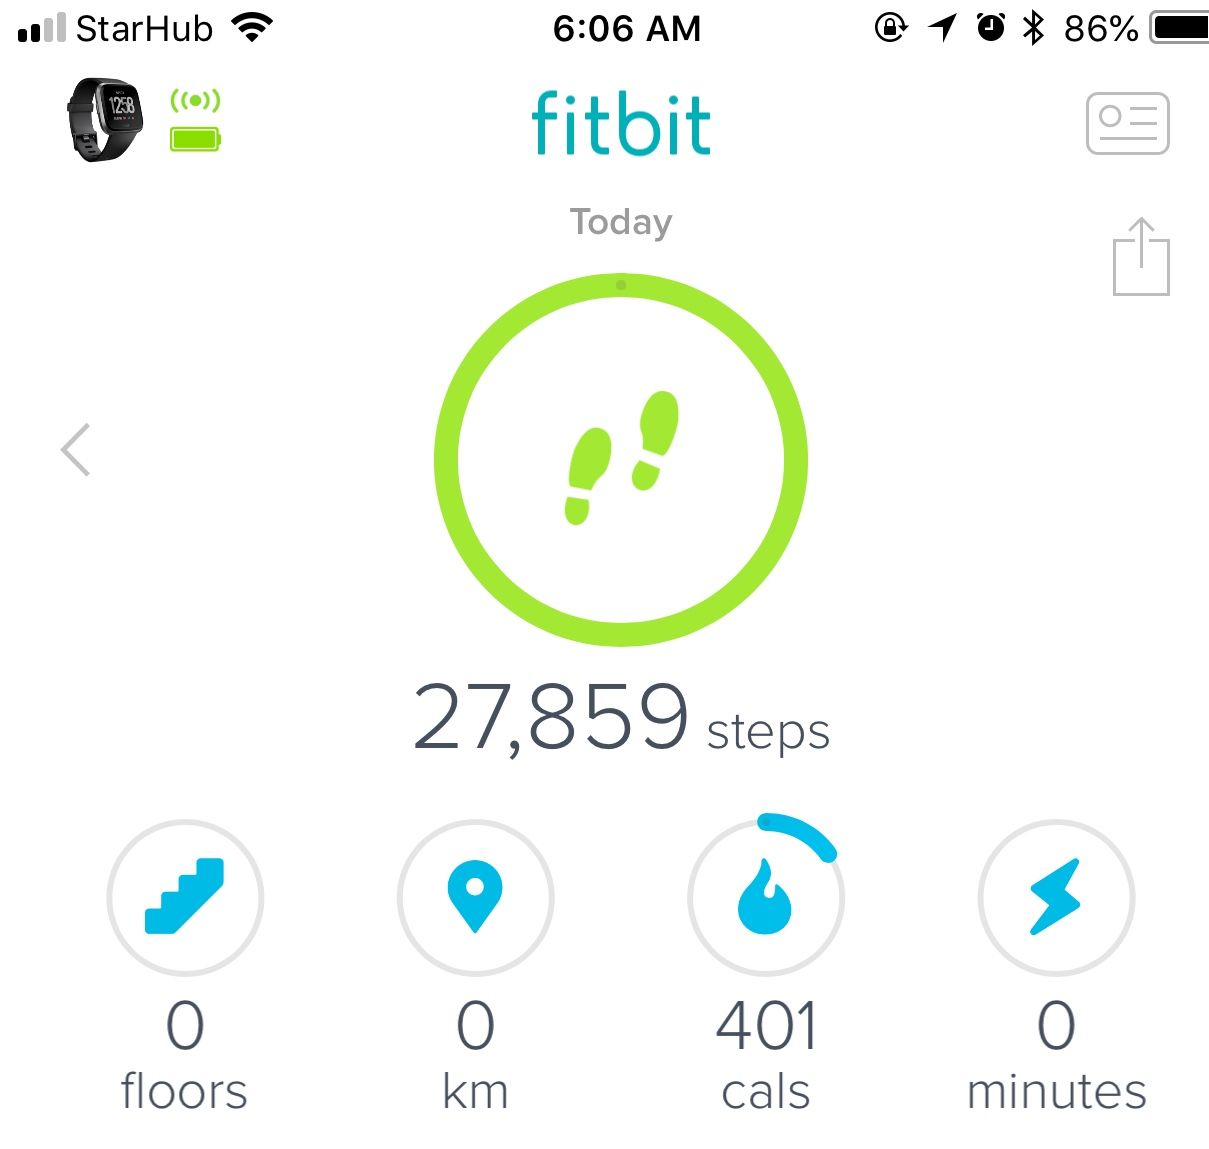 fitbit step counter inaccurate